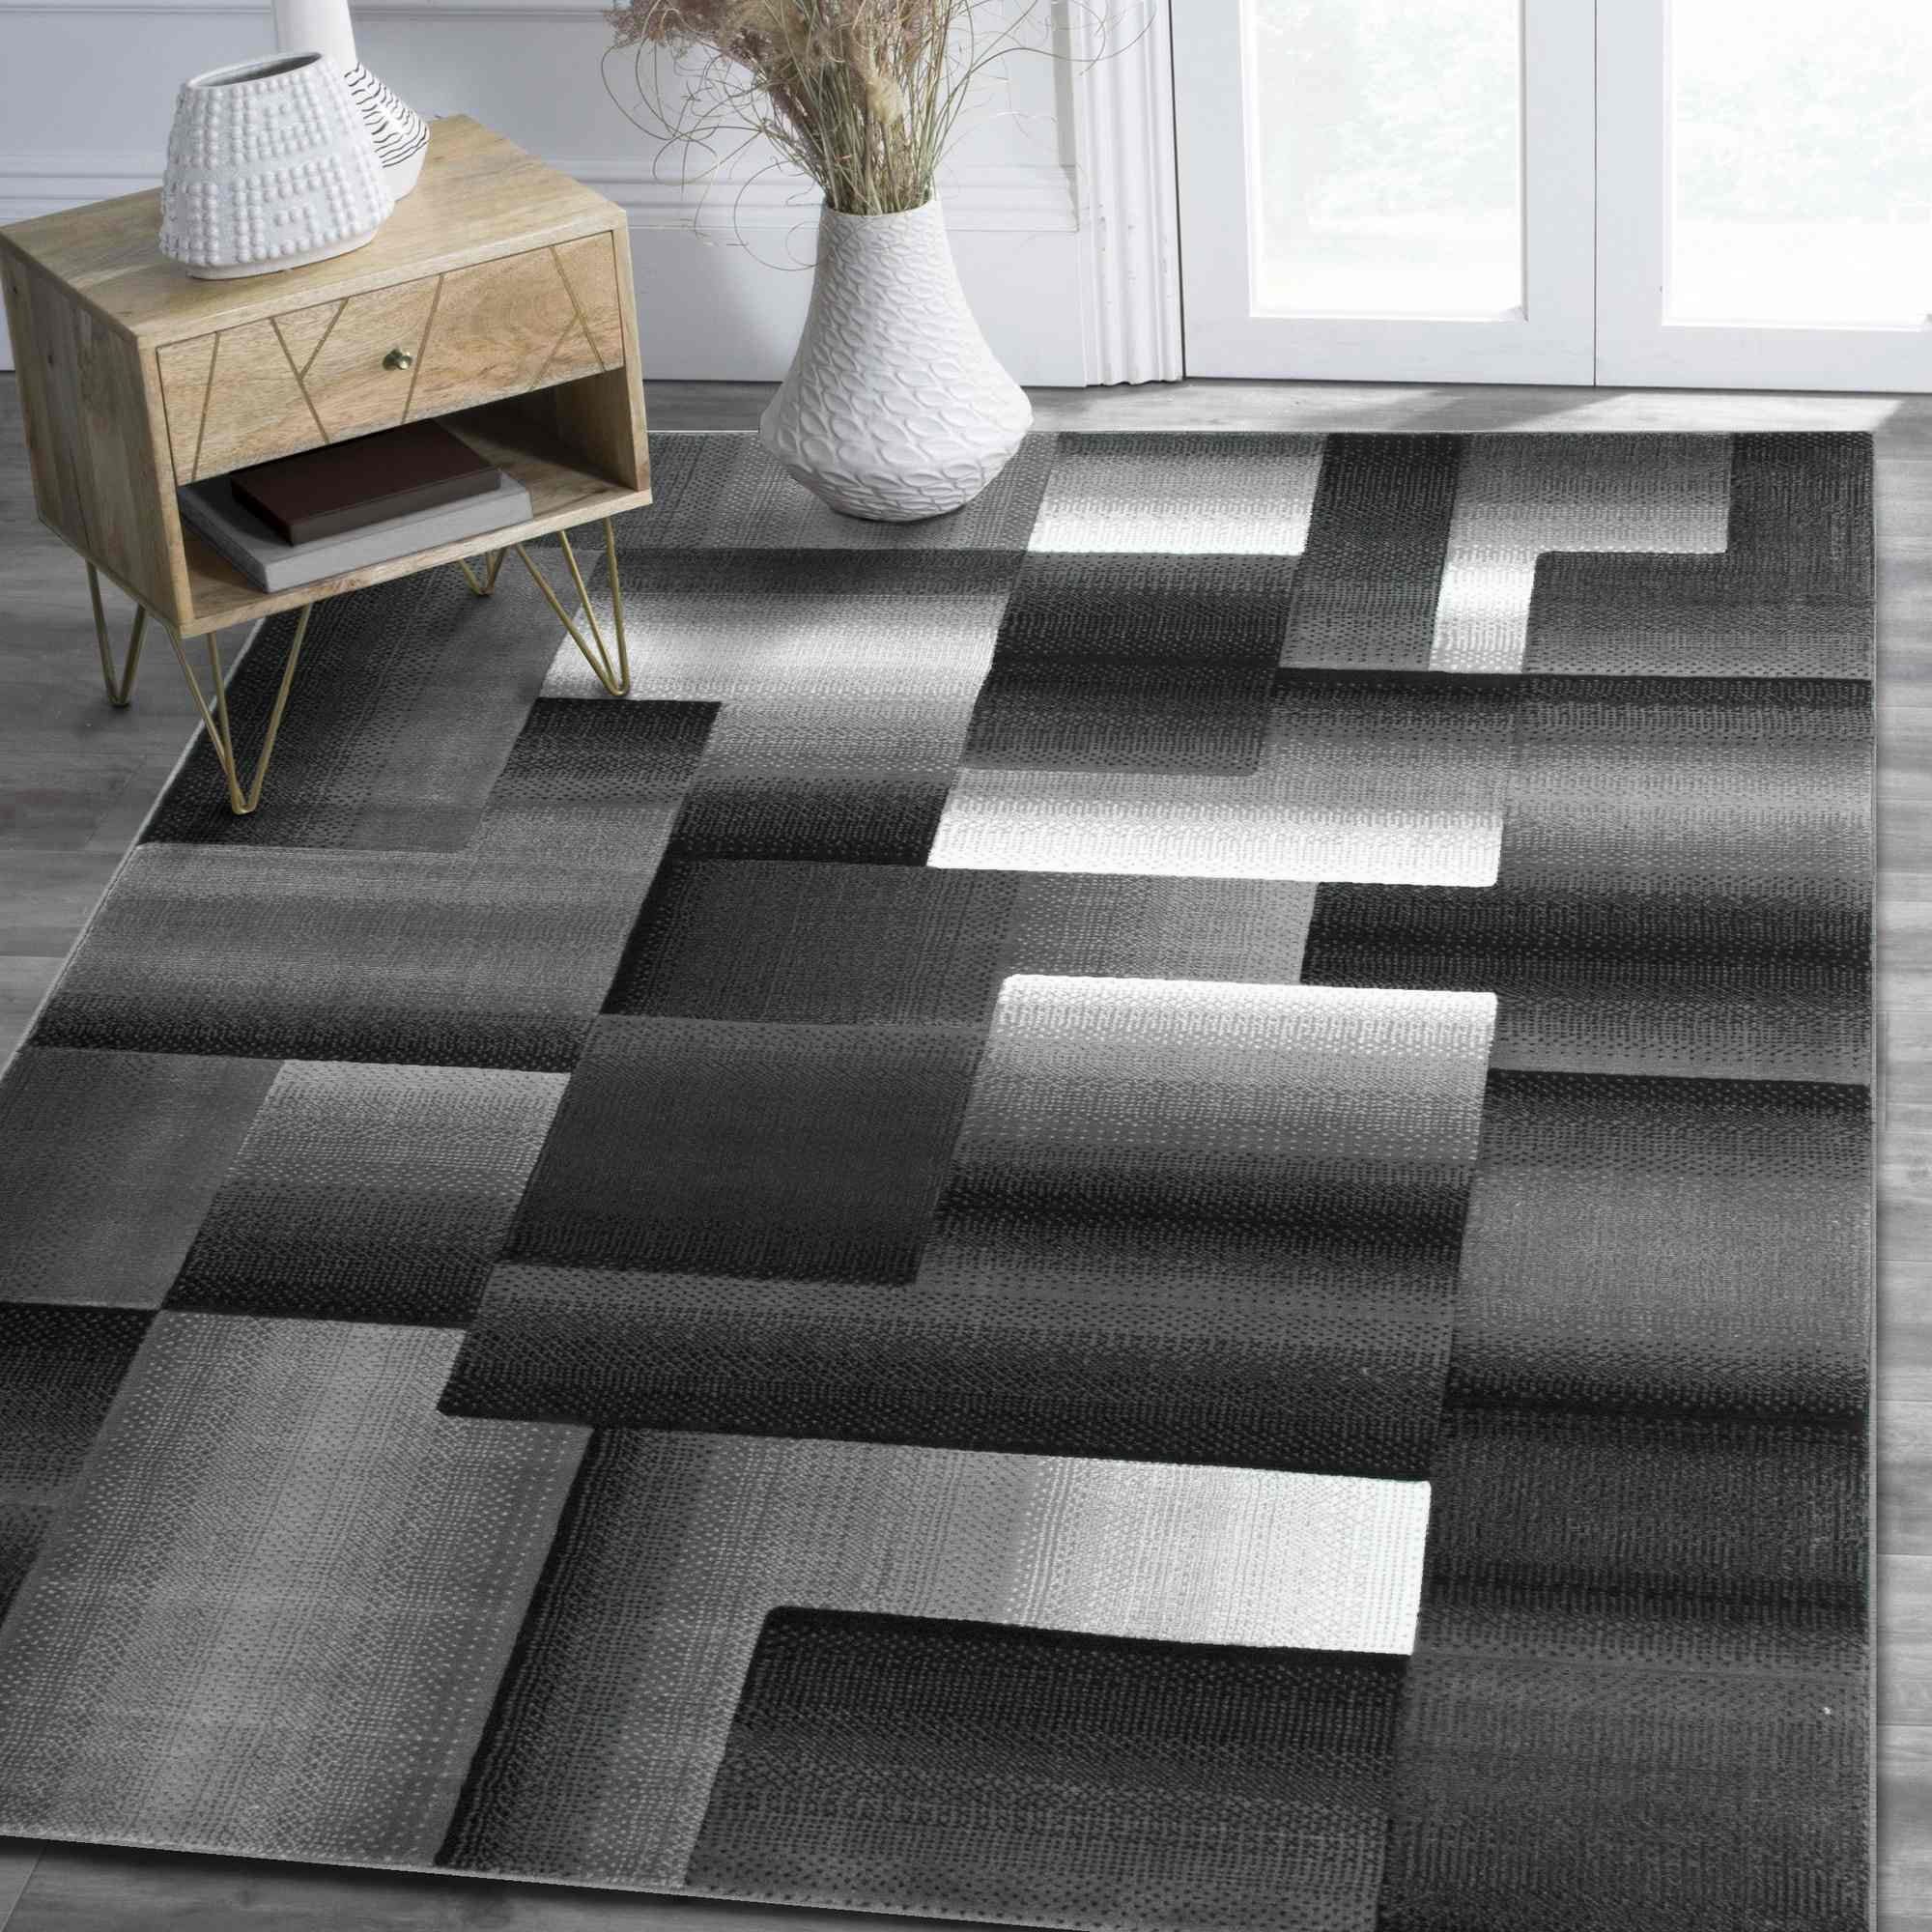 Grey/silver/black/abstract Area Rug Modern Contemporary Geometric Cube And  Square Design Pattern Carpet – Walmart Within Square Rugs (View 11 of 15)